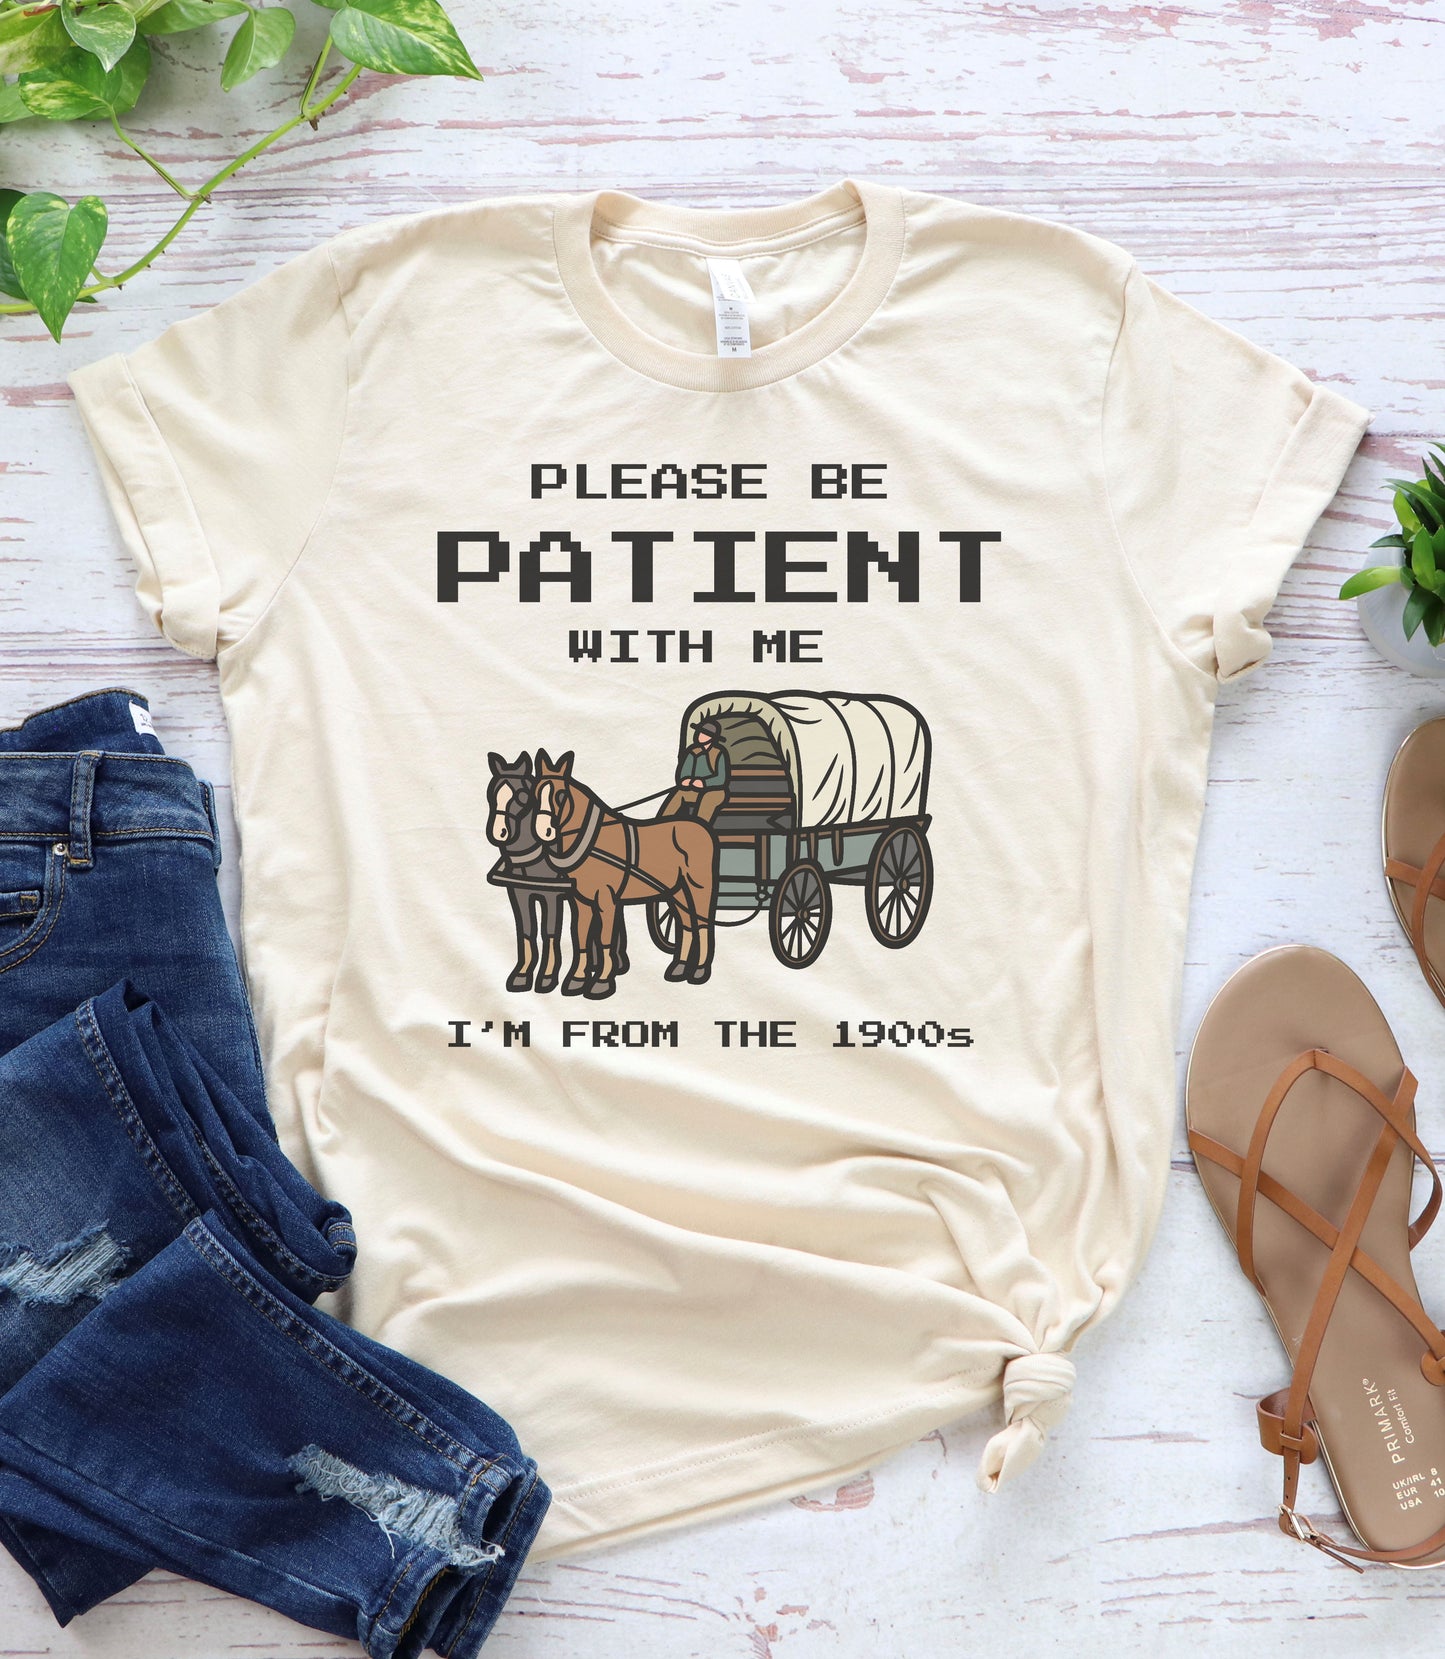 Please Be Patient With Me I'm From the 1900's Graphic Tee